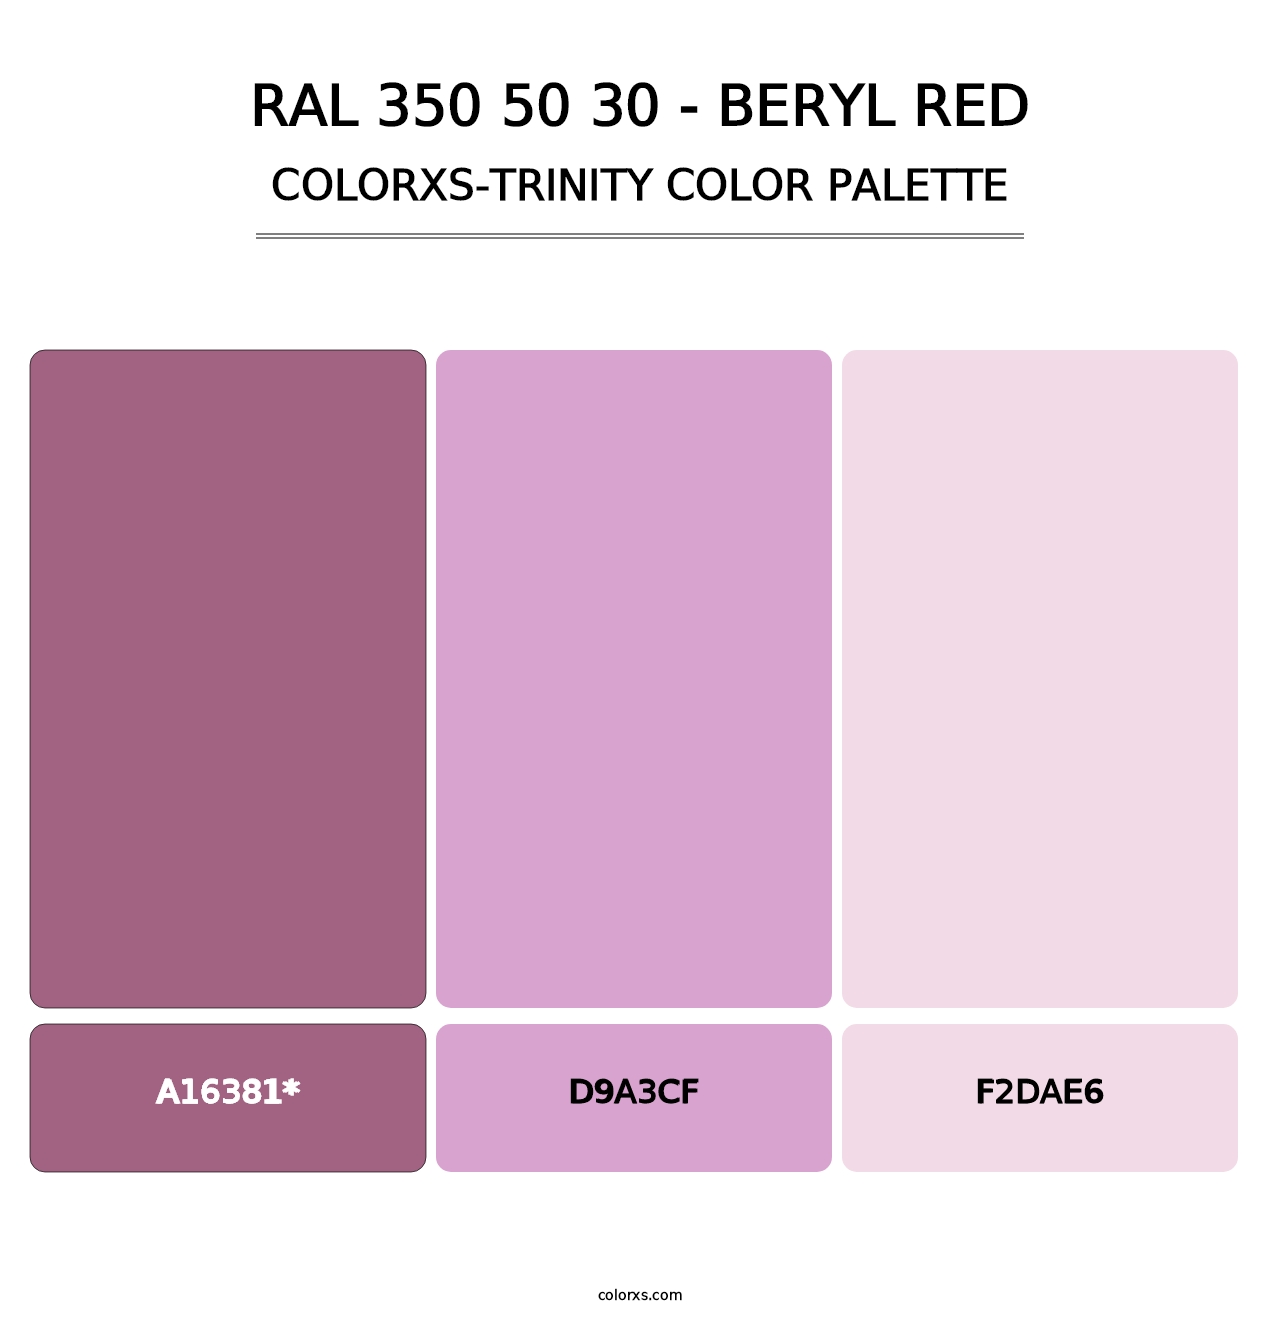 RAL 350 50 30 - Beryl Red - Colorxs Trinity Palette